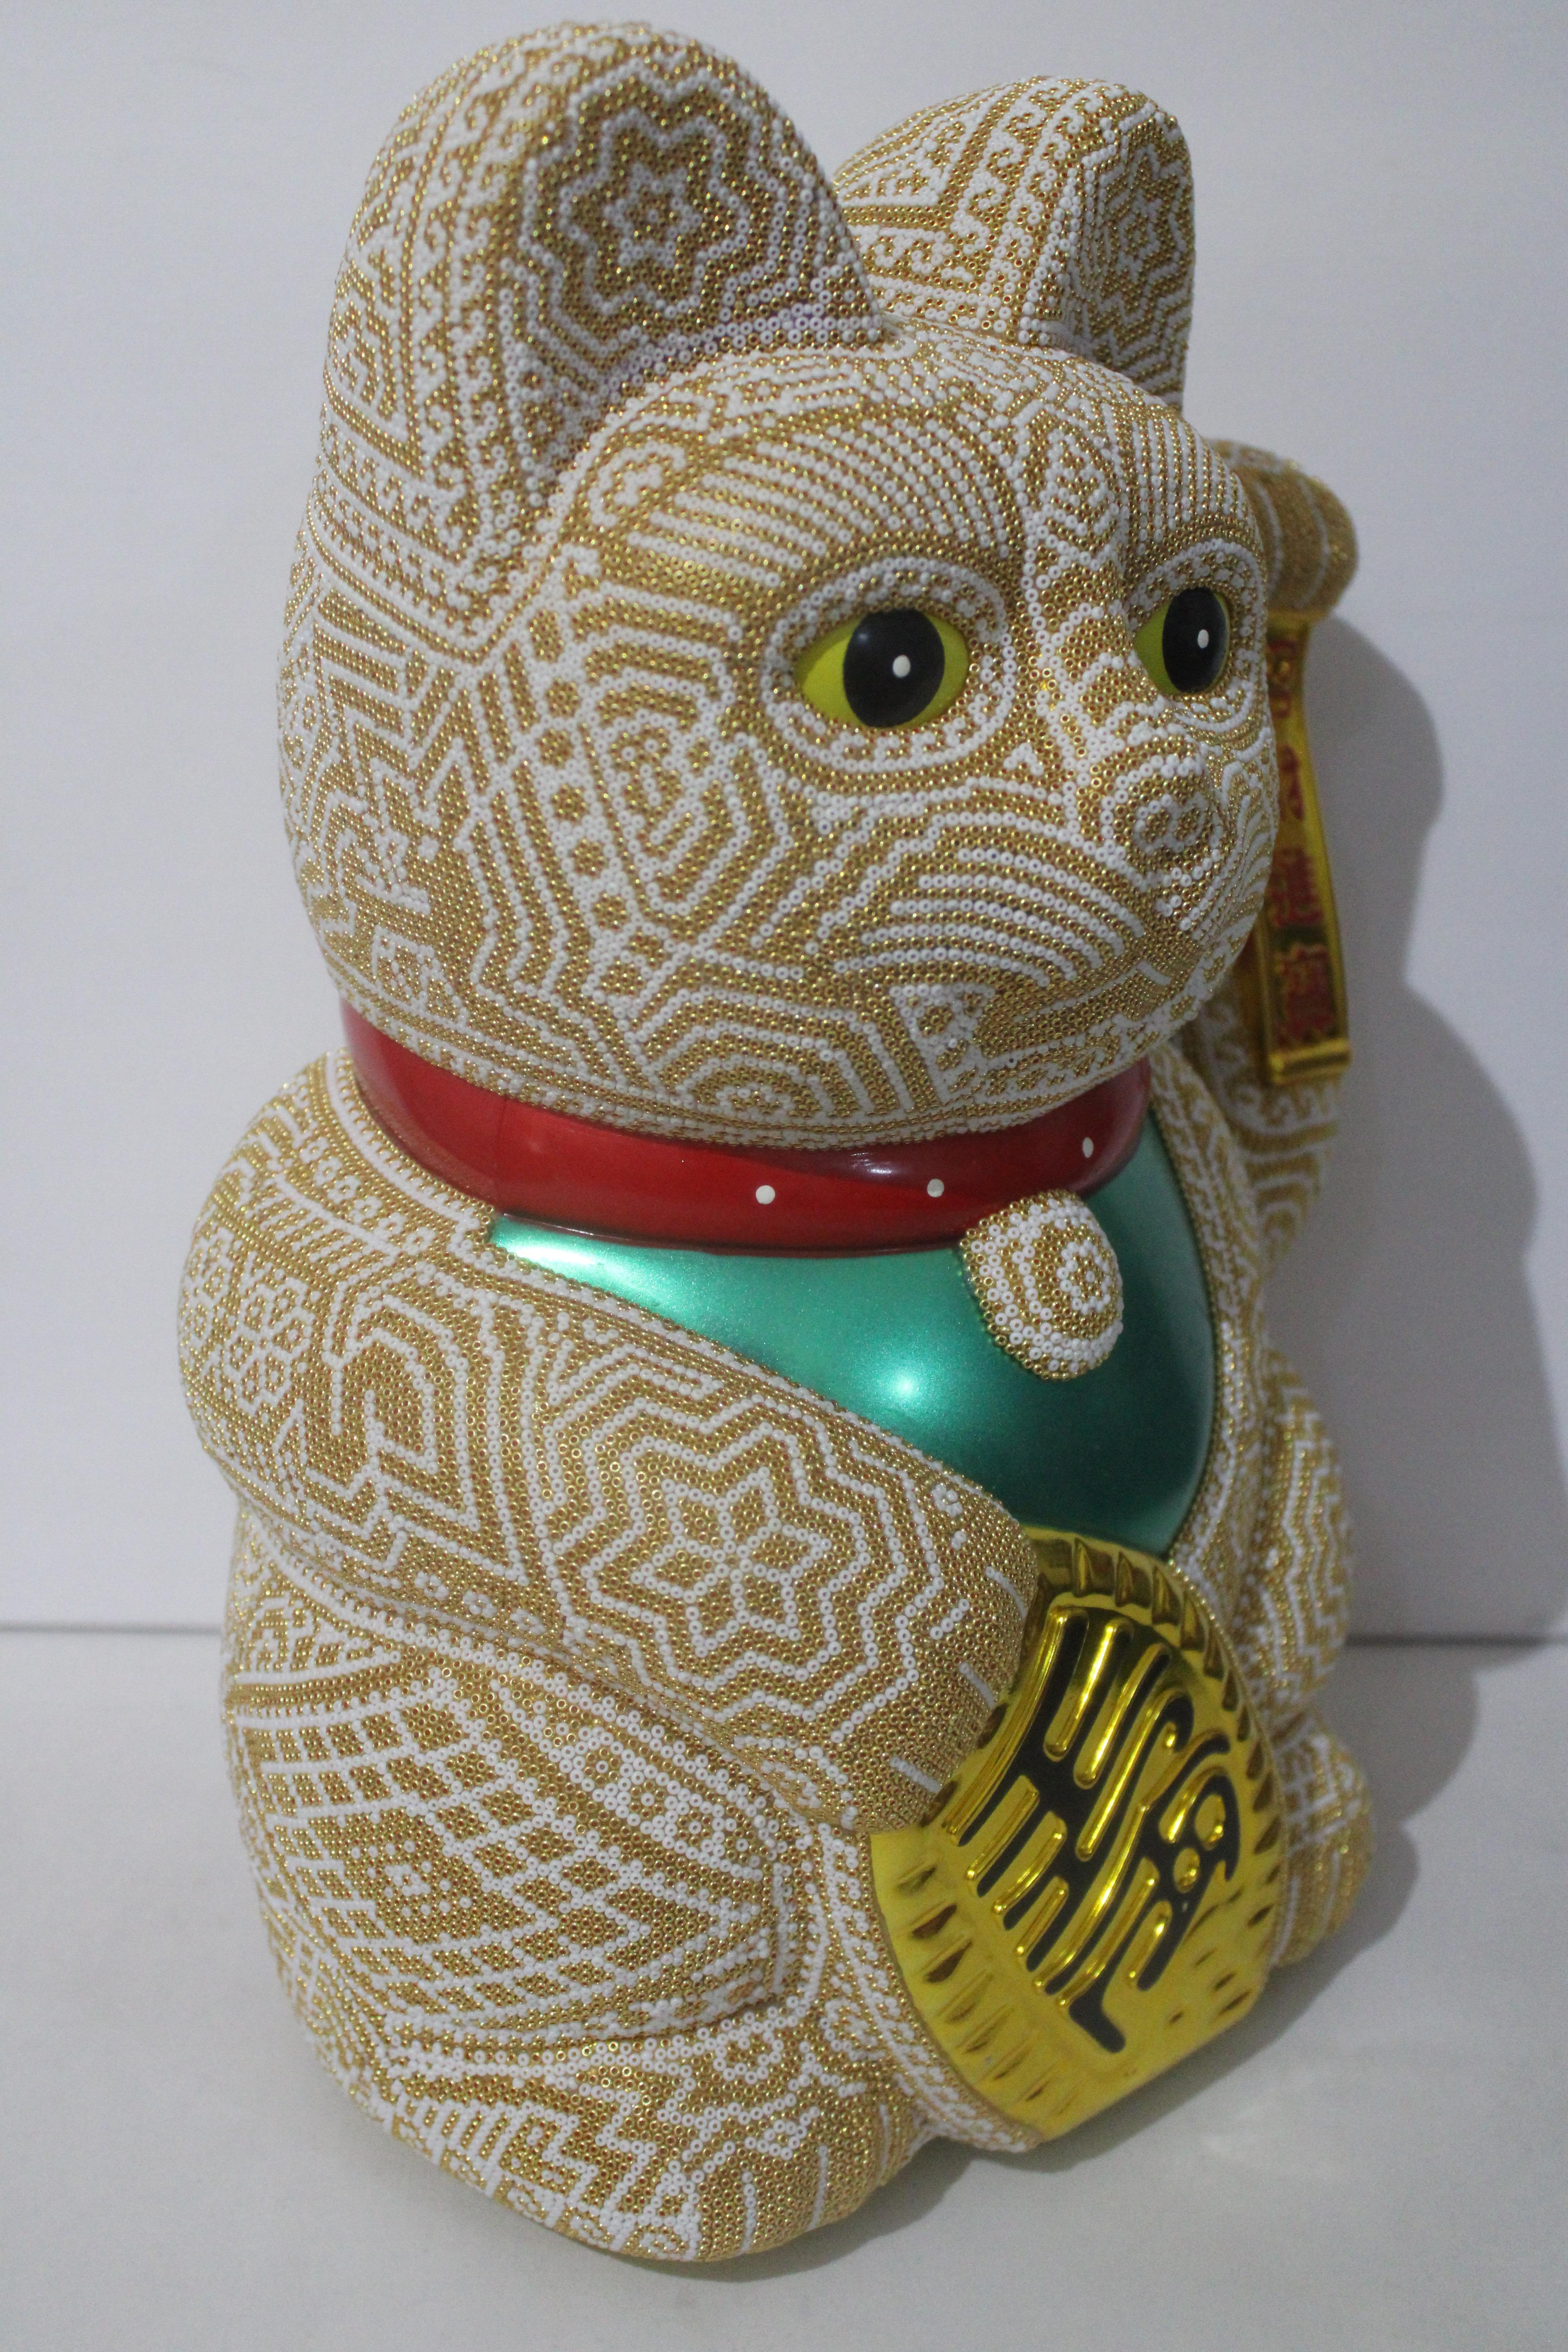 CHROMA aka Rick Wolfryd  Abstract Sculpture - Large Money Cat from Huichol ALTERATIONS Series